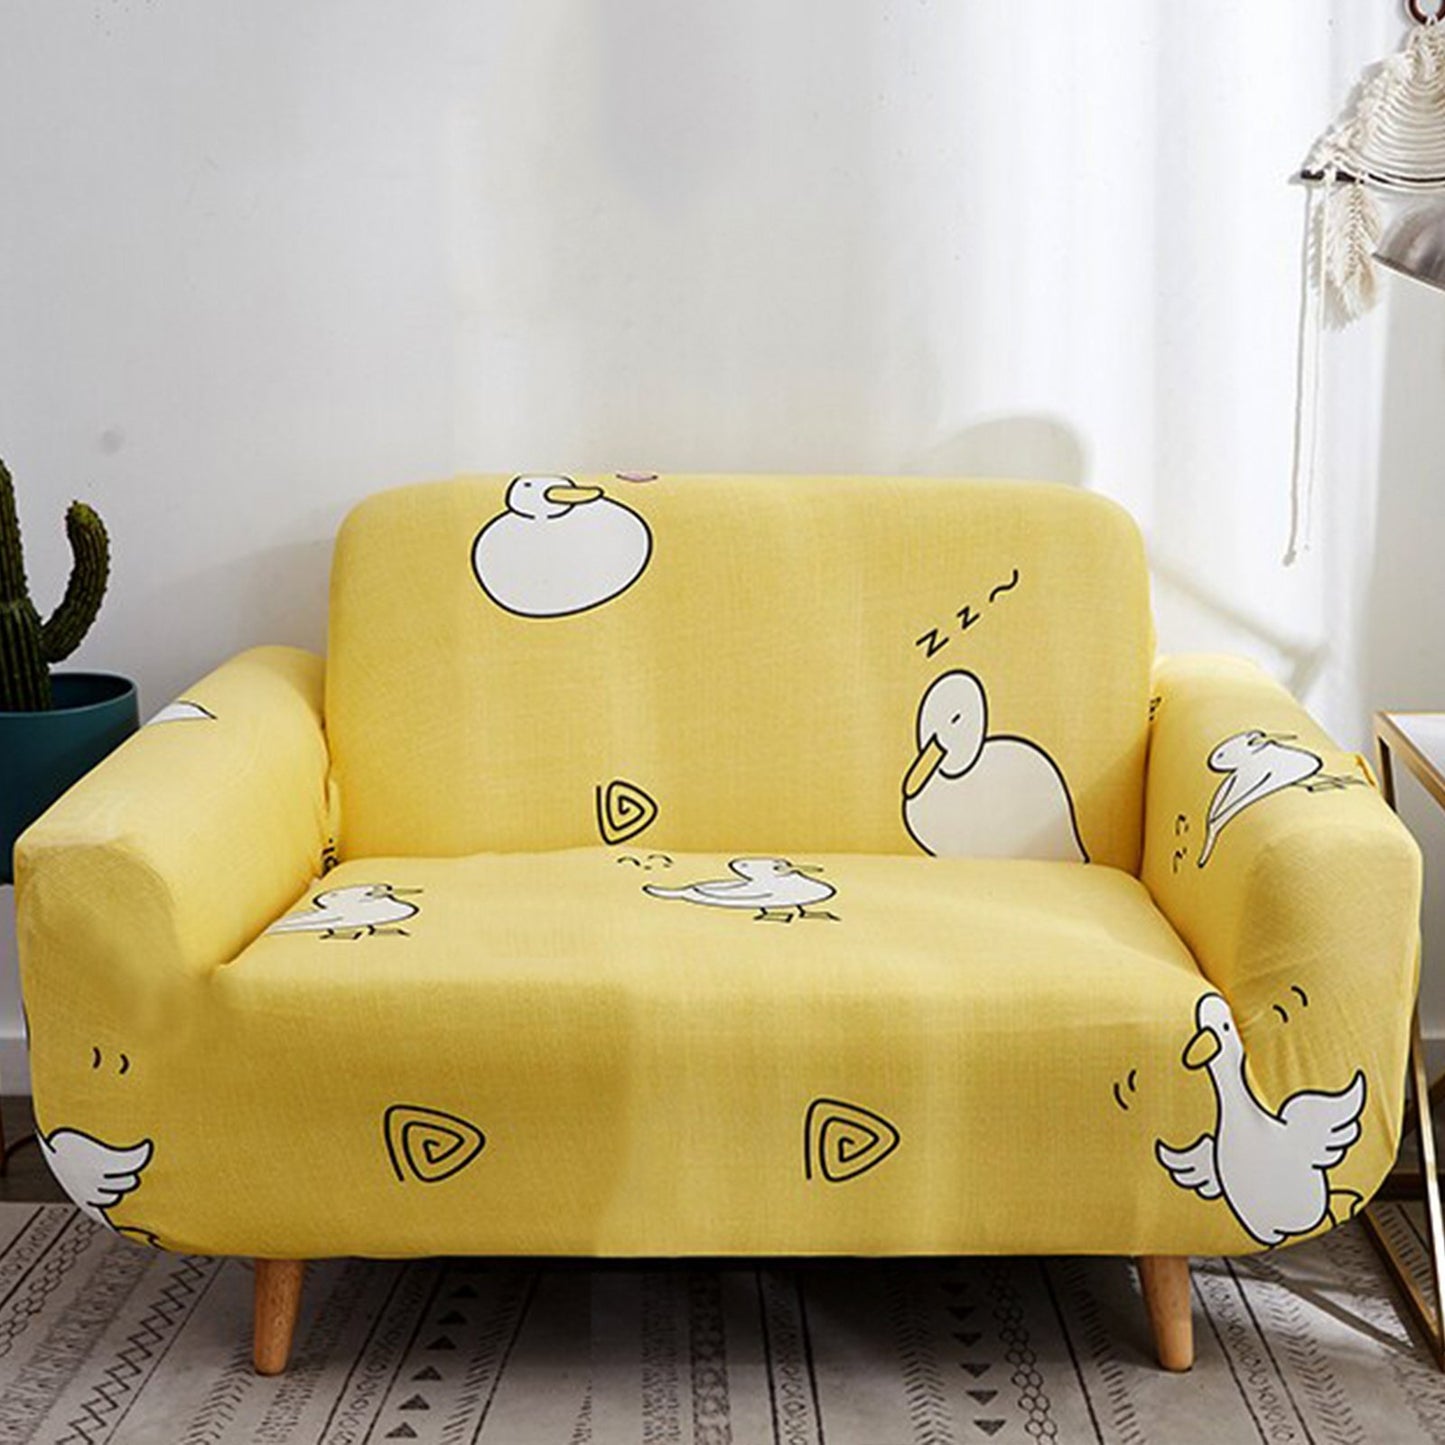 Printed Sofa Cover - Yellow Duck